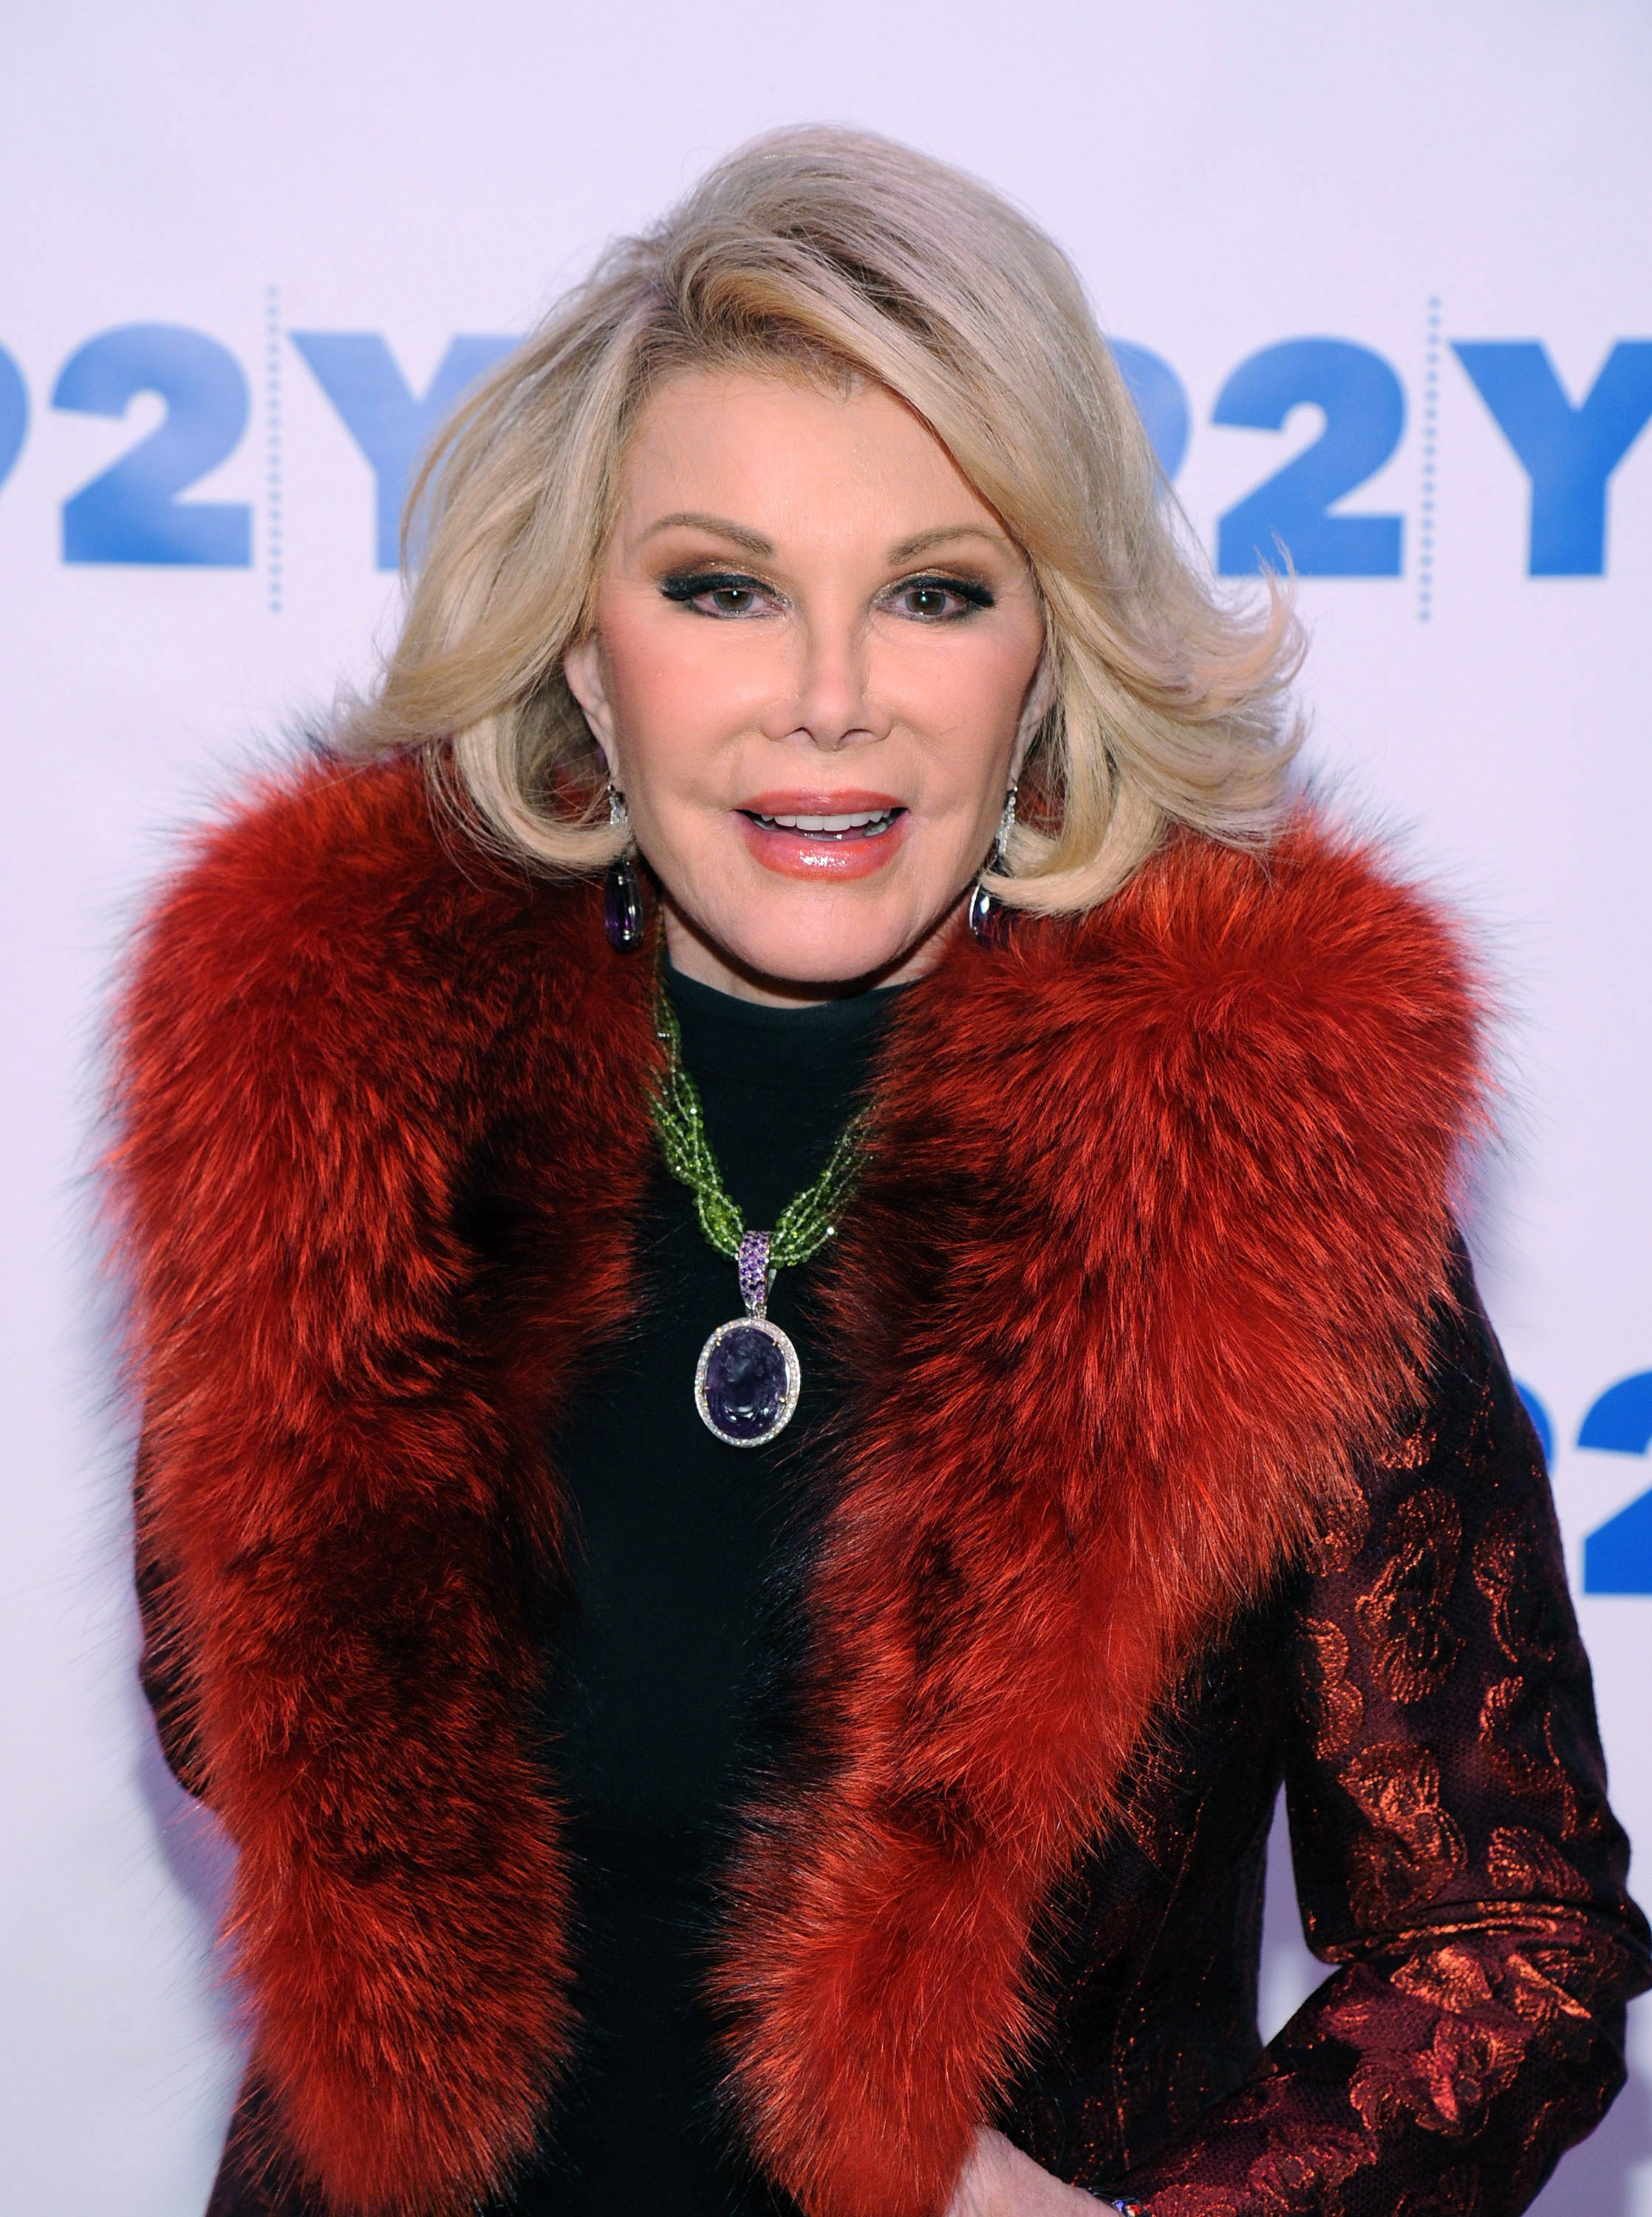 Joan Rivers in New York in 2014. | Source: Getty Images